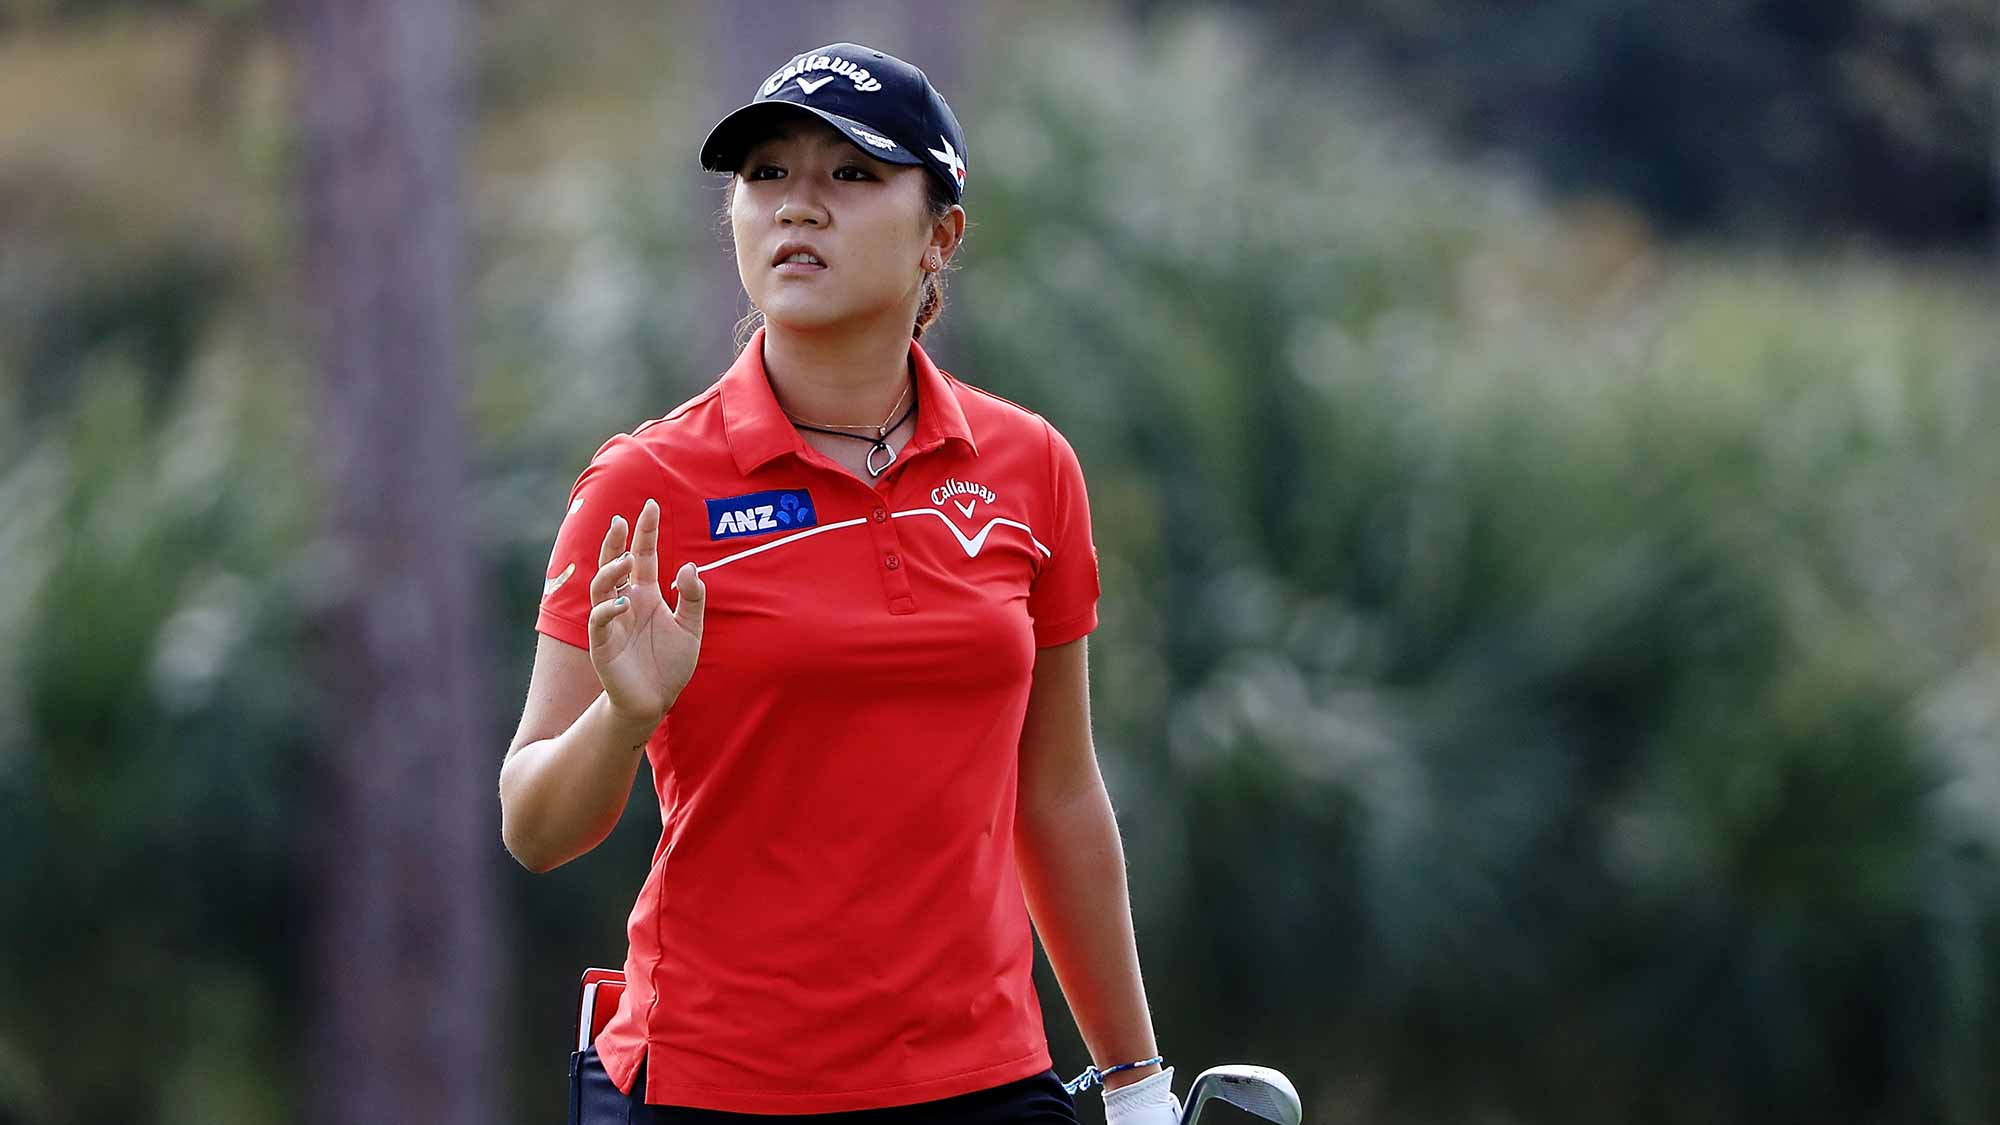 Lydia Ko of New Zealand waves to the crowd on the second hole during the second round of the CME Group Tour Championship at Tiburon Golf Club